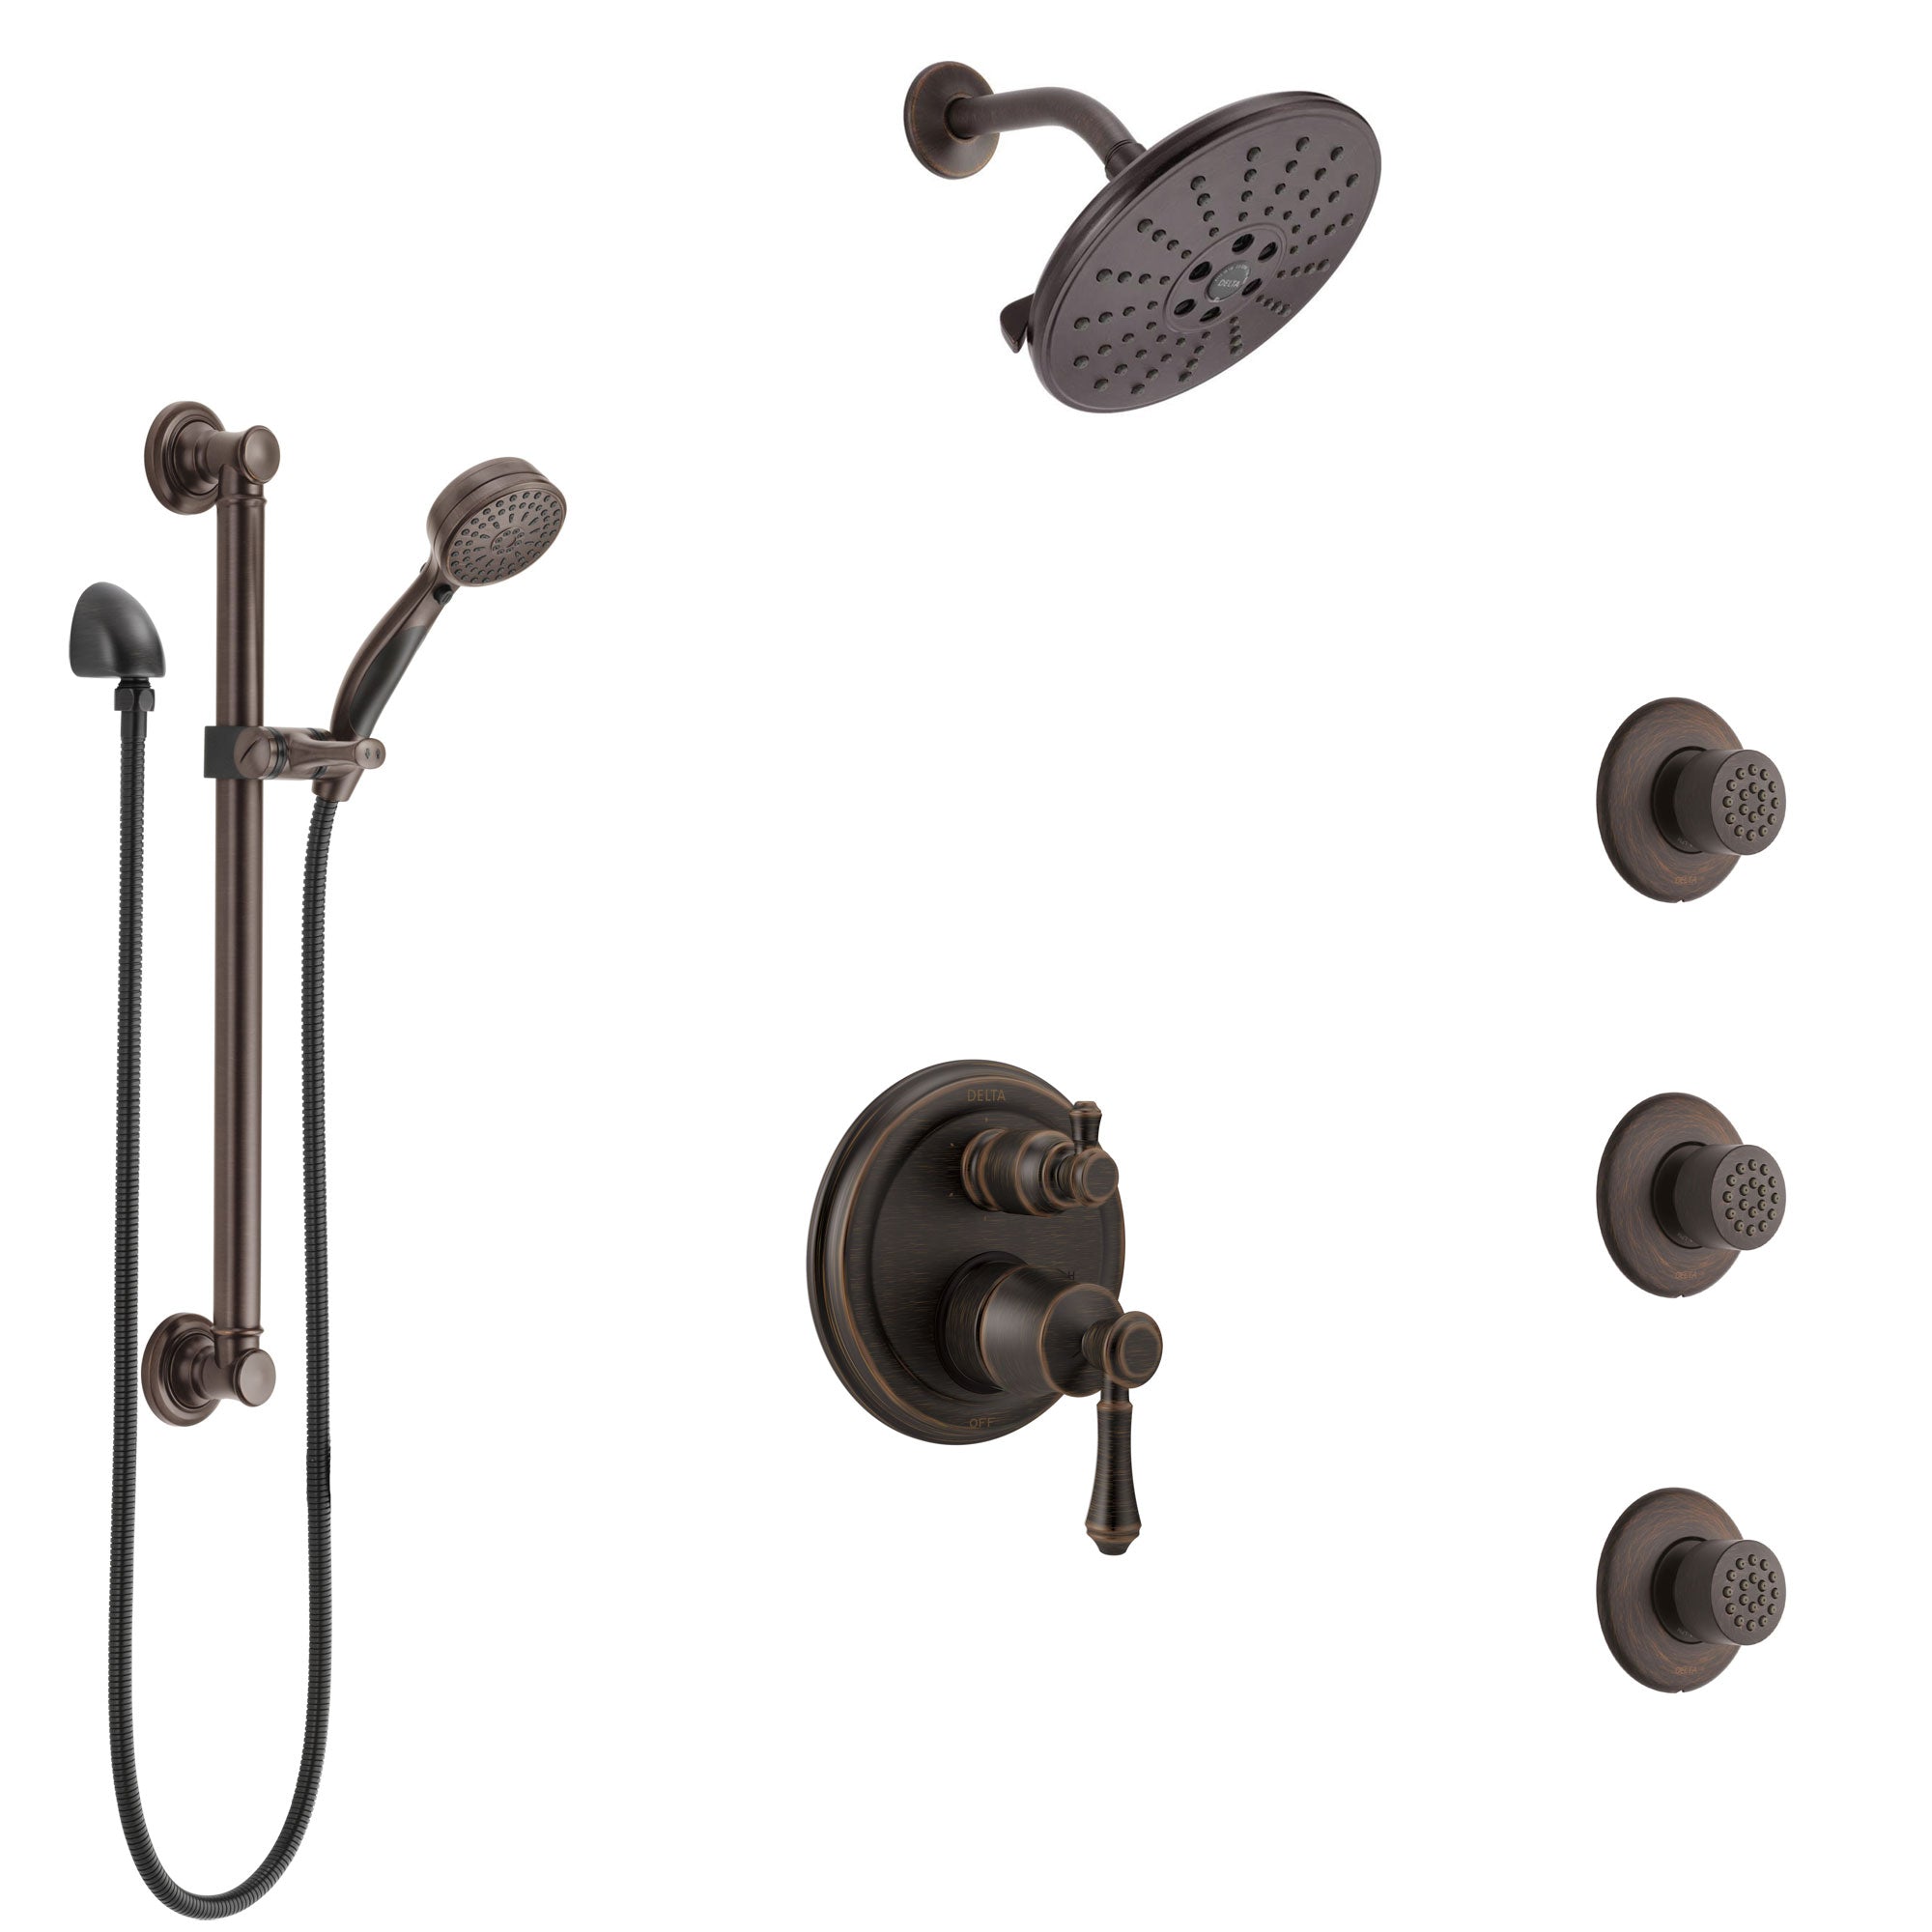 Delta Cassidy Venetian Bronze Shower System with Control Handle, Integrated Diverter, Showerhead, 3 Body Sprays, and Grab Bar Hand Shower SS24997RB7